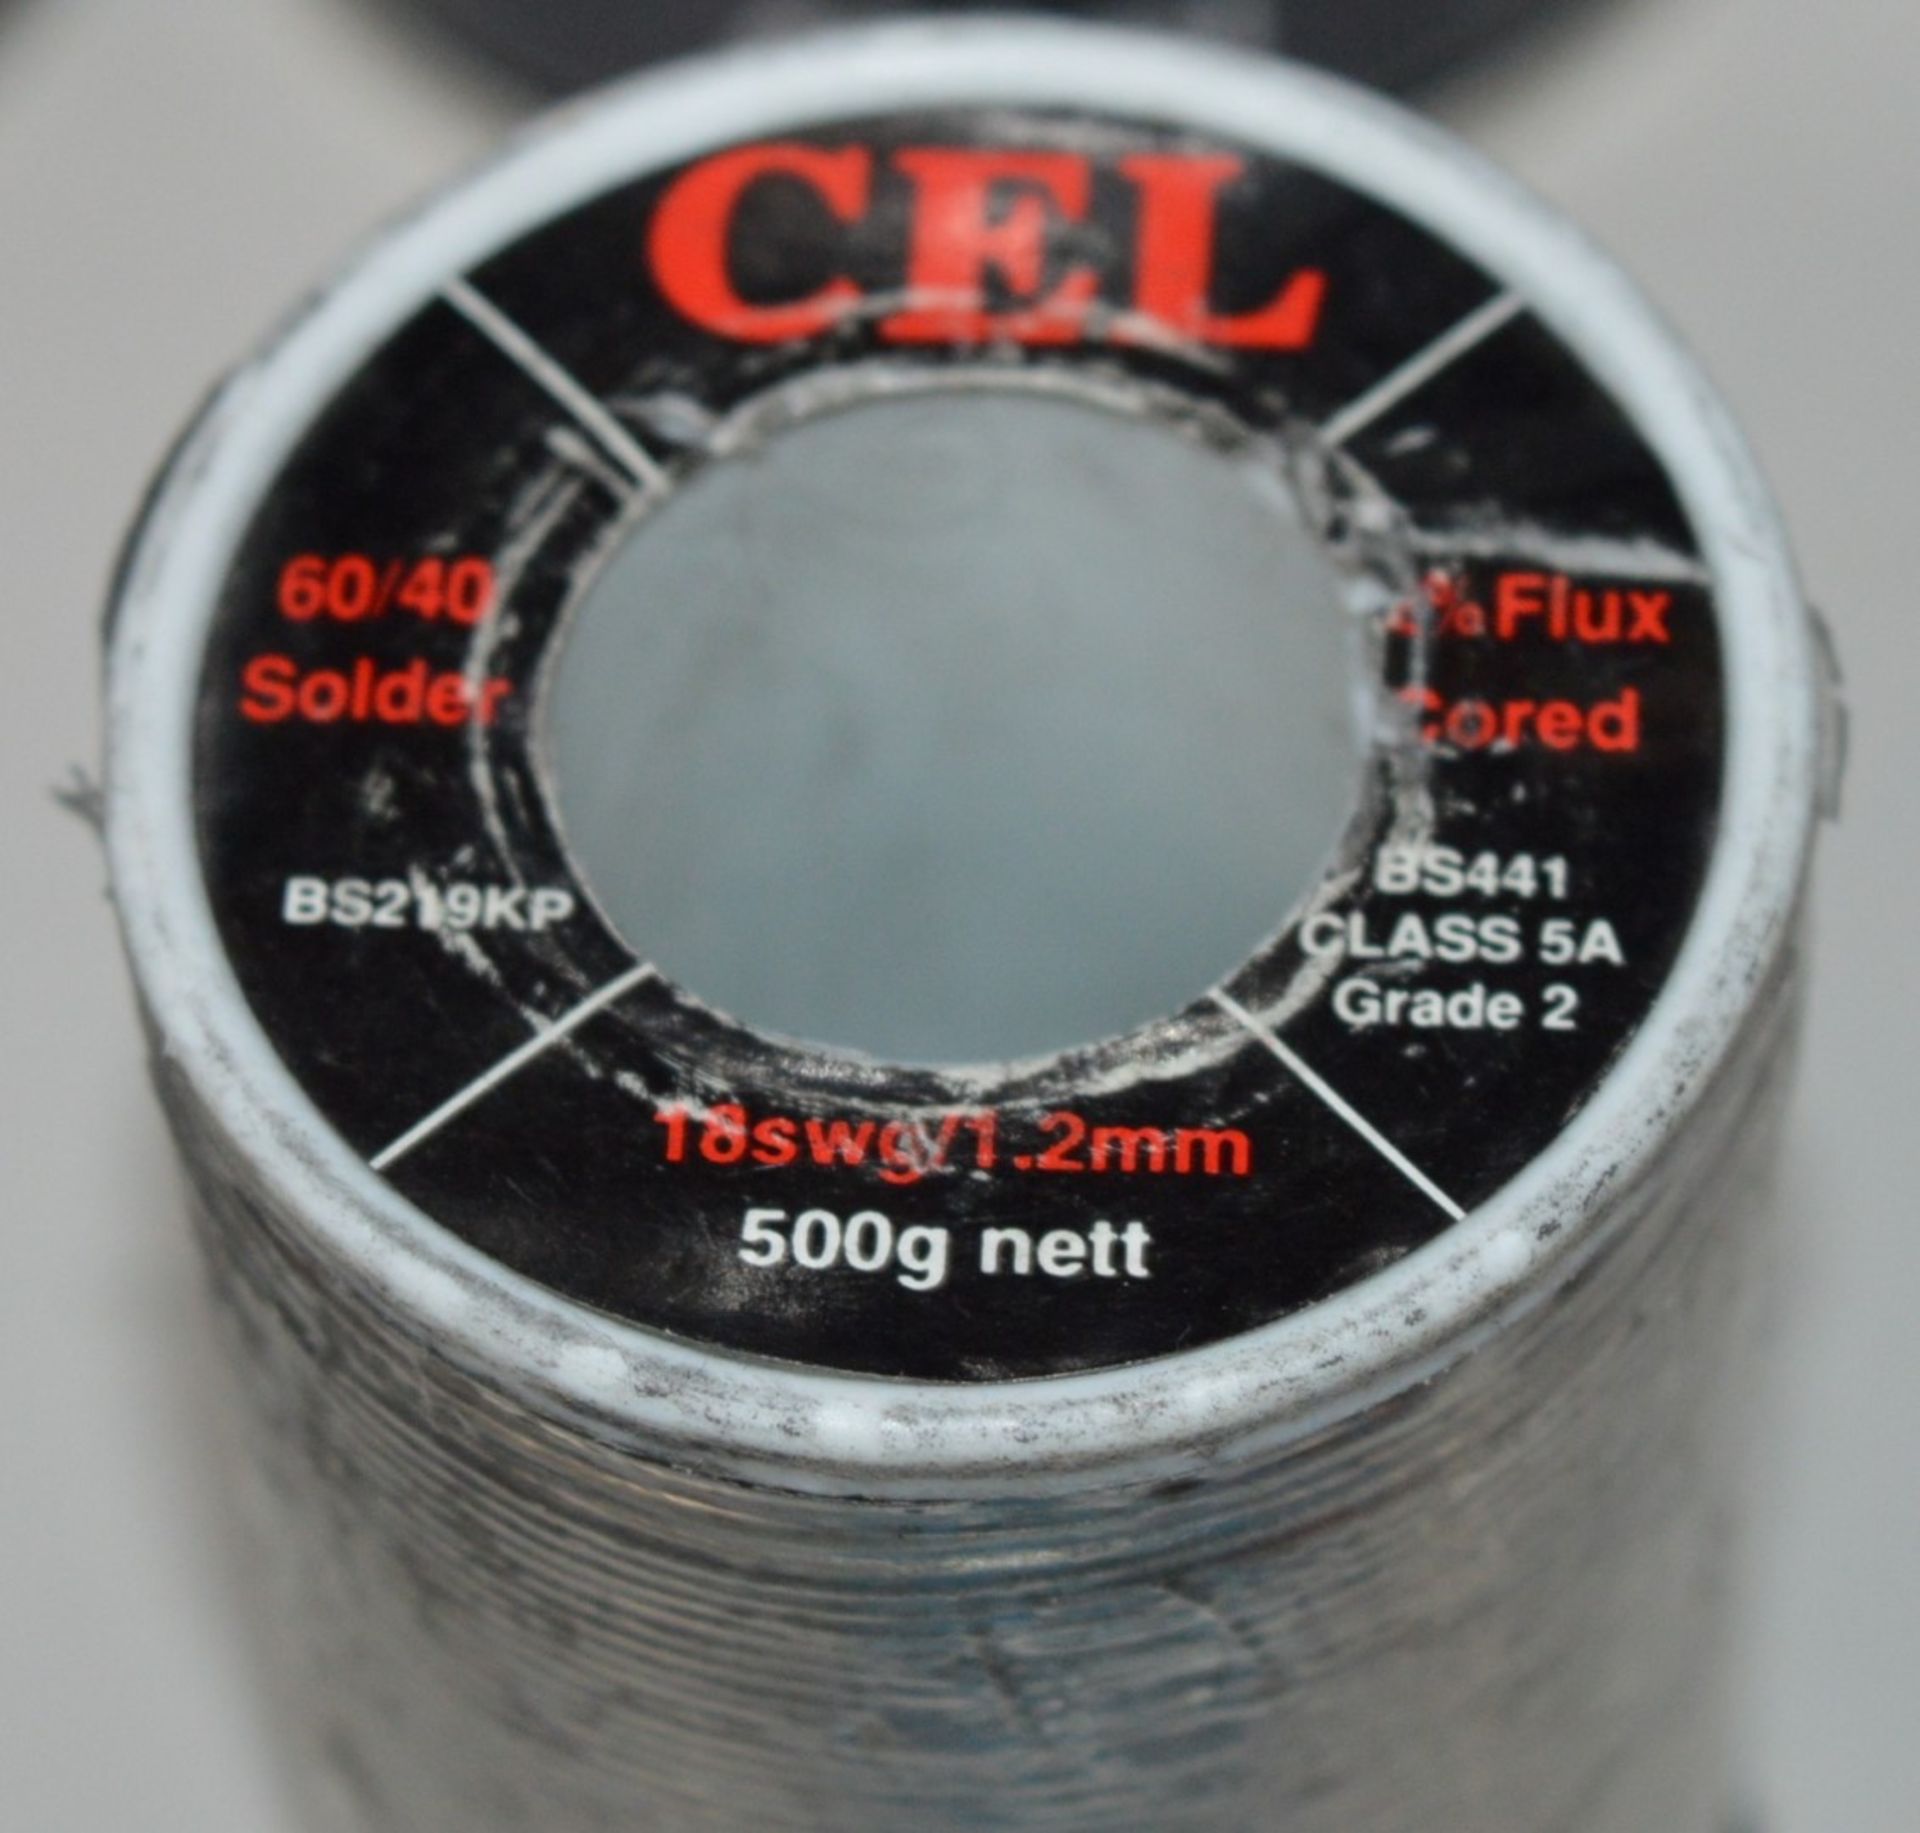 Assorted Collection of Electrical Consumables - CL300 - Including 6 x Sterling Butane Refills, 1 x - Image 25 of 30